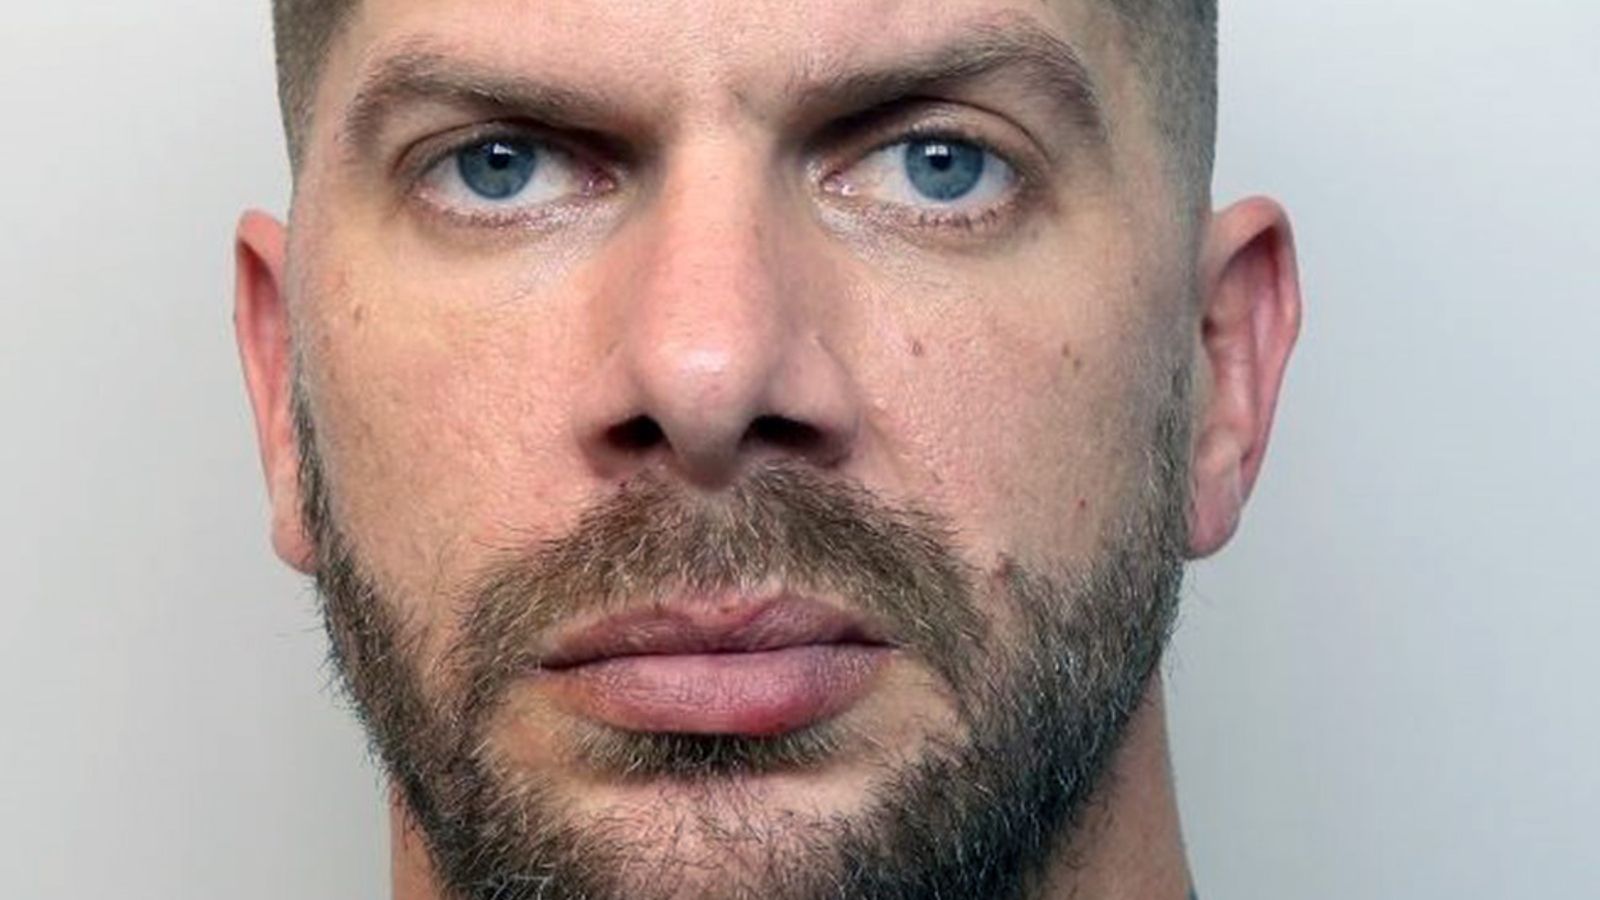 Carpet fitter Darren Hall who murdered ex-partner Sarah Henshaw and dumped body in lay-by jailed for at least 17 years